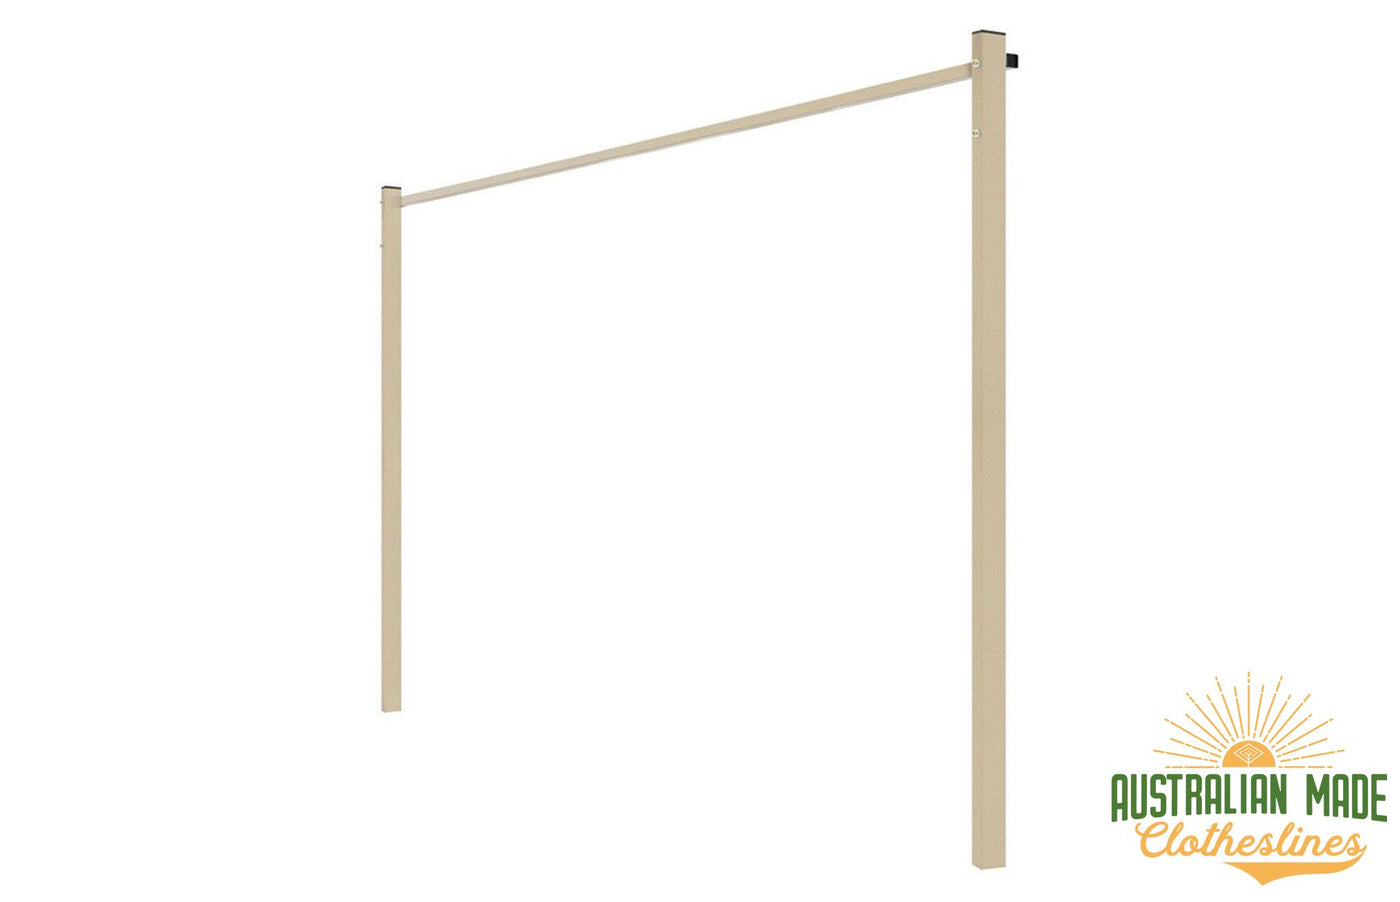 Austral Ground Mount Kit - Classic Cream Standard Ground Mount Kit for Soil or Grass Mounting - Australian Made Clotheslines